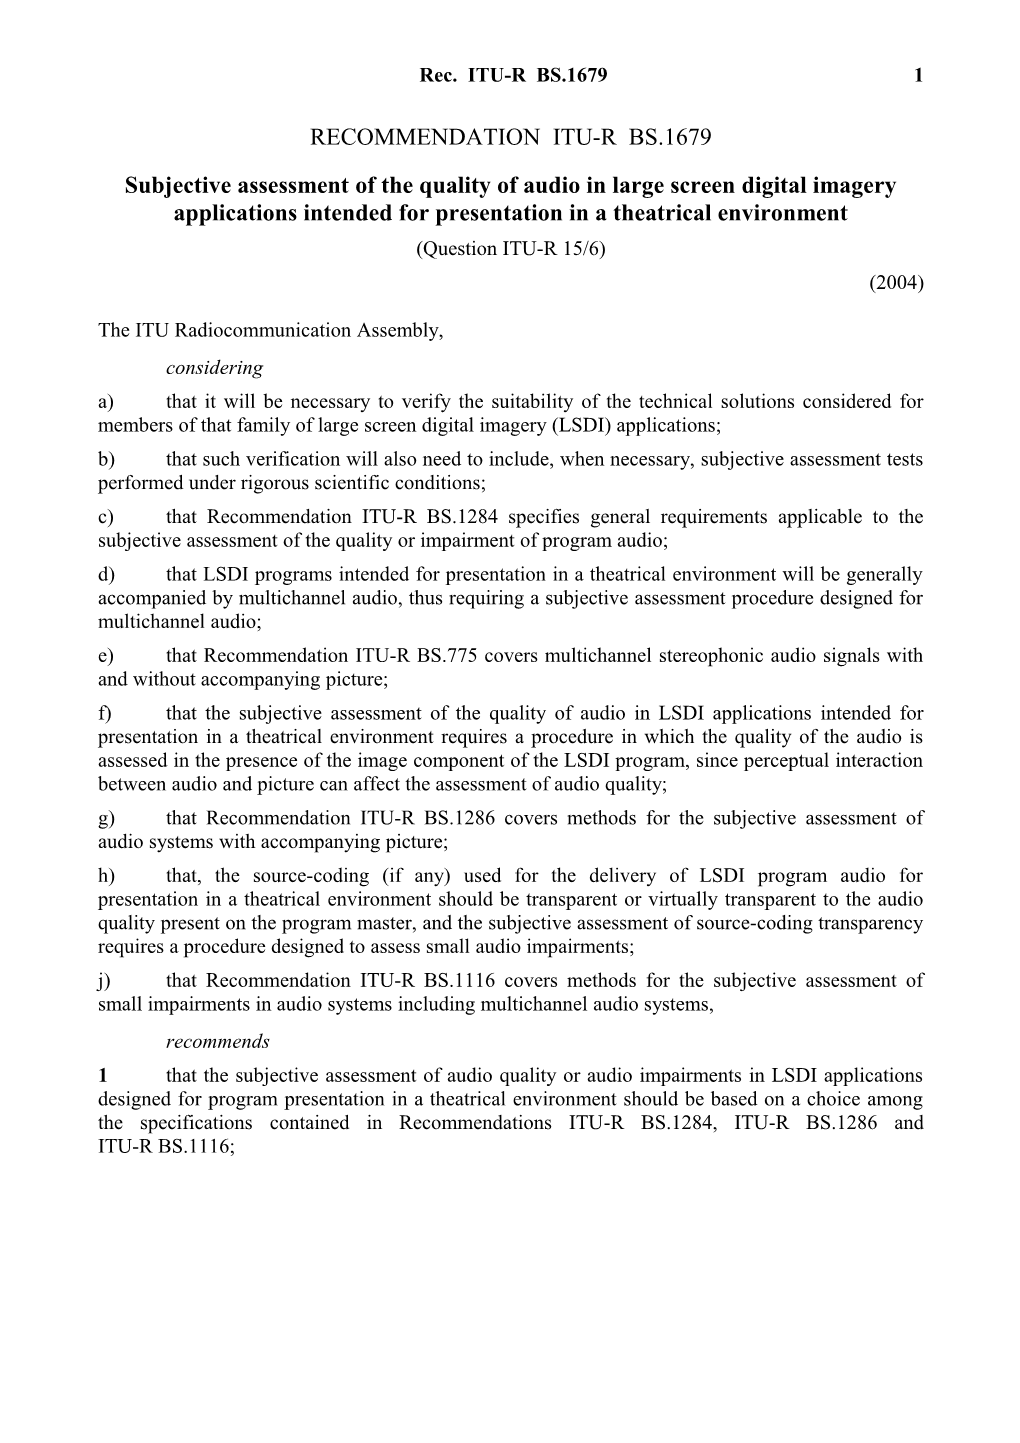 RECOMMENDATION ITU-R BS.1679 - Subjective Assessment of the Quality of Audio in Large Screen